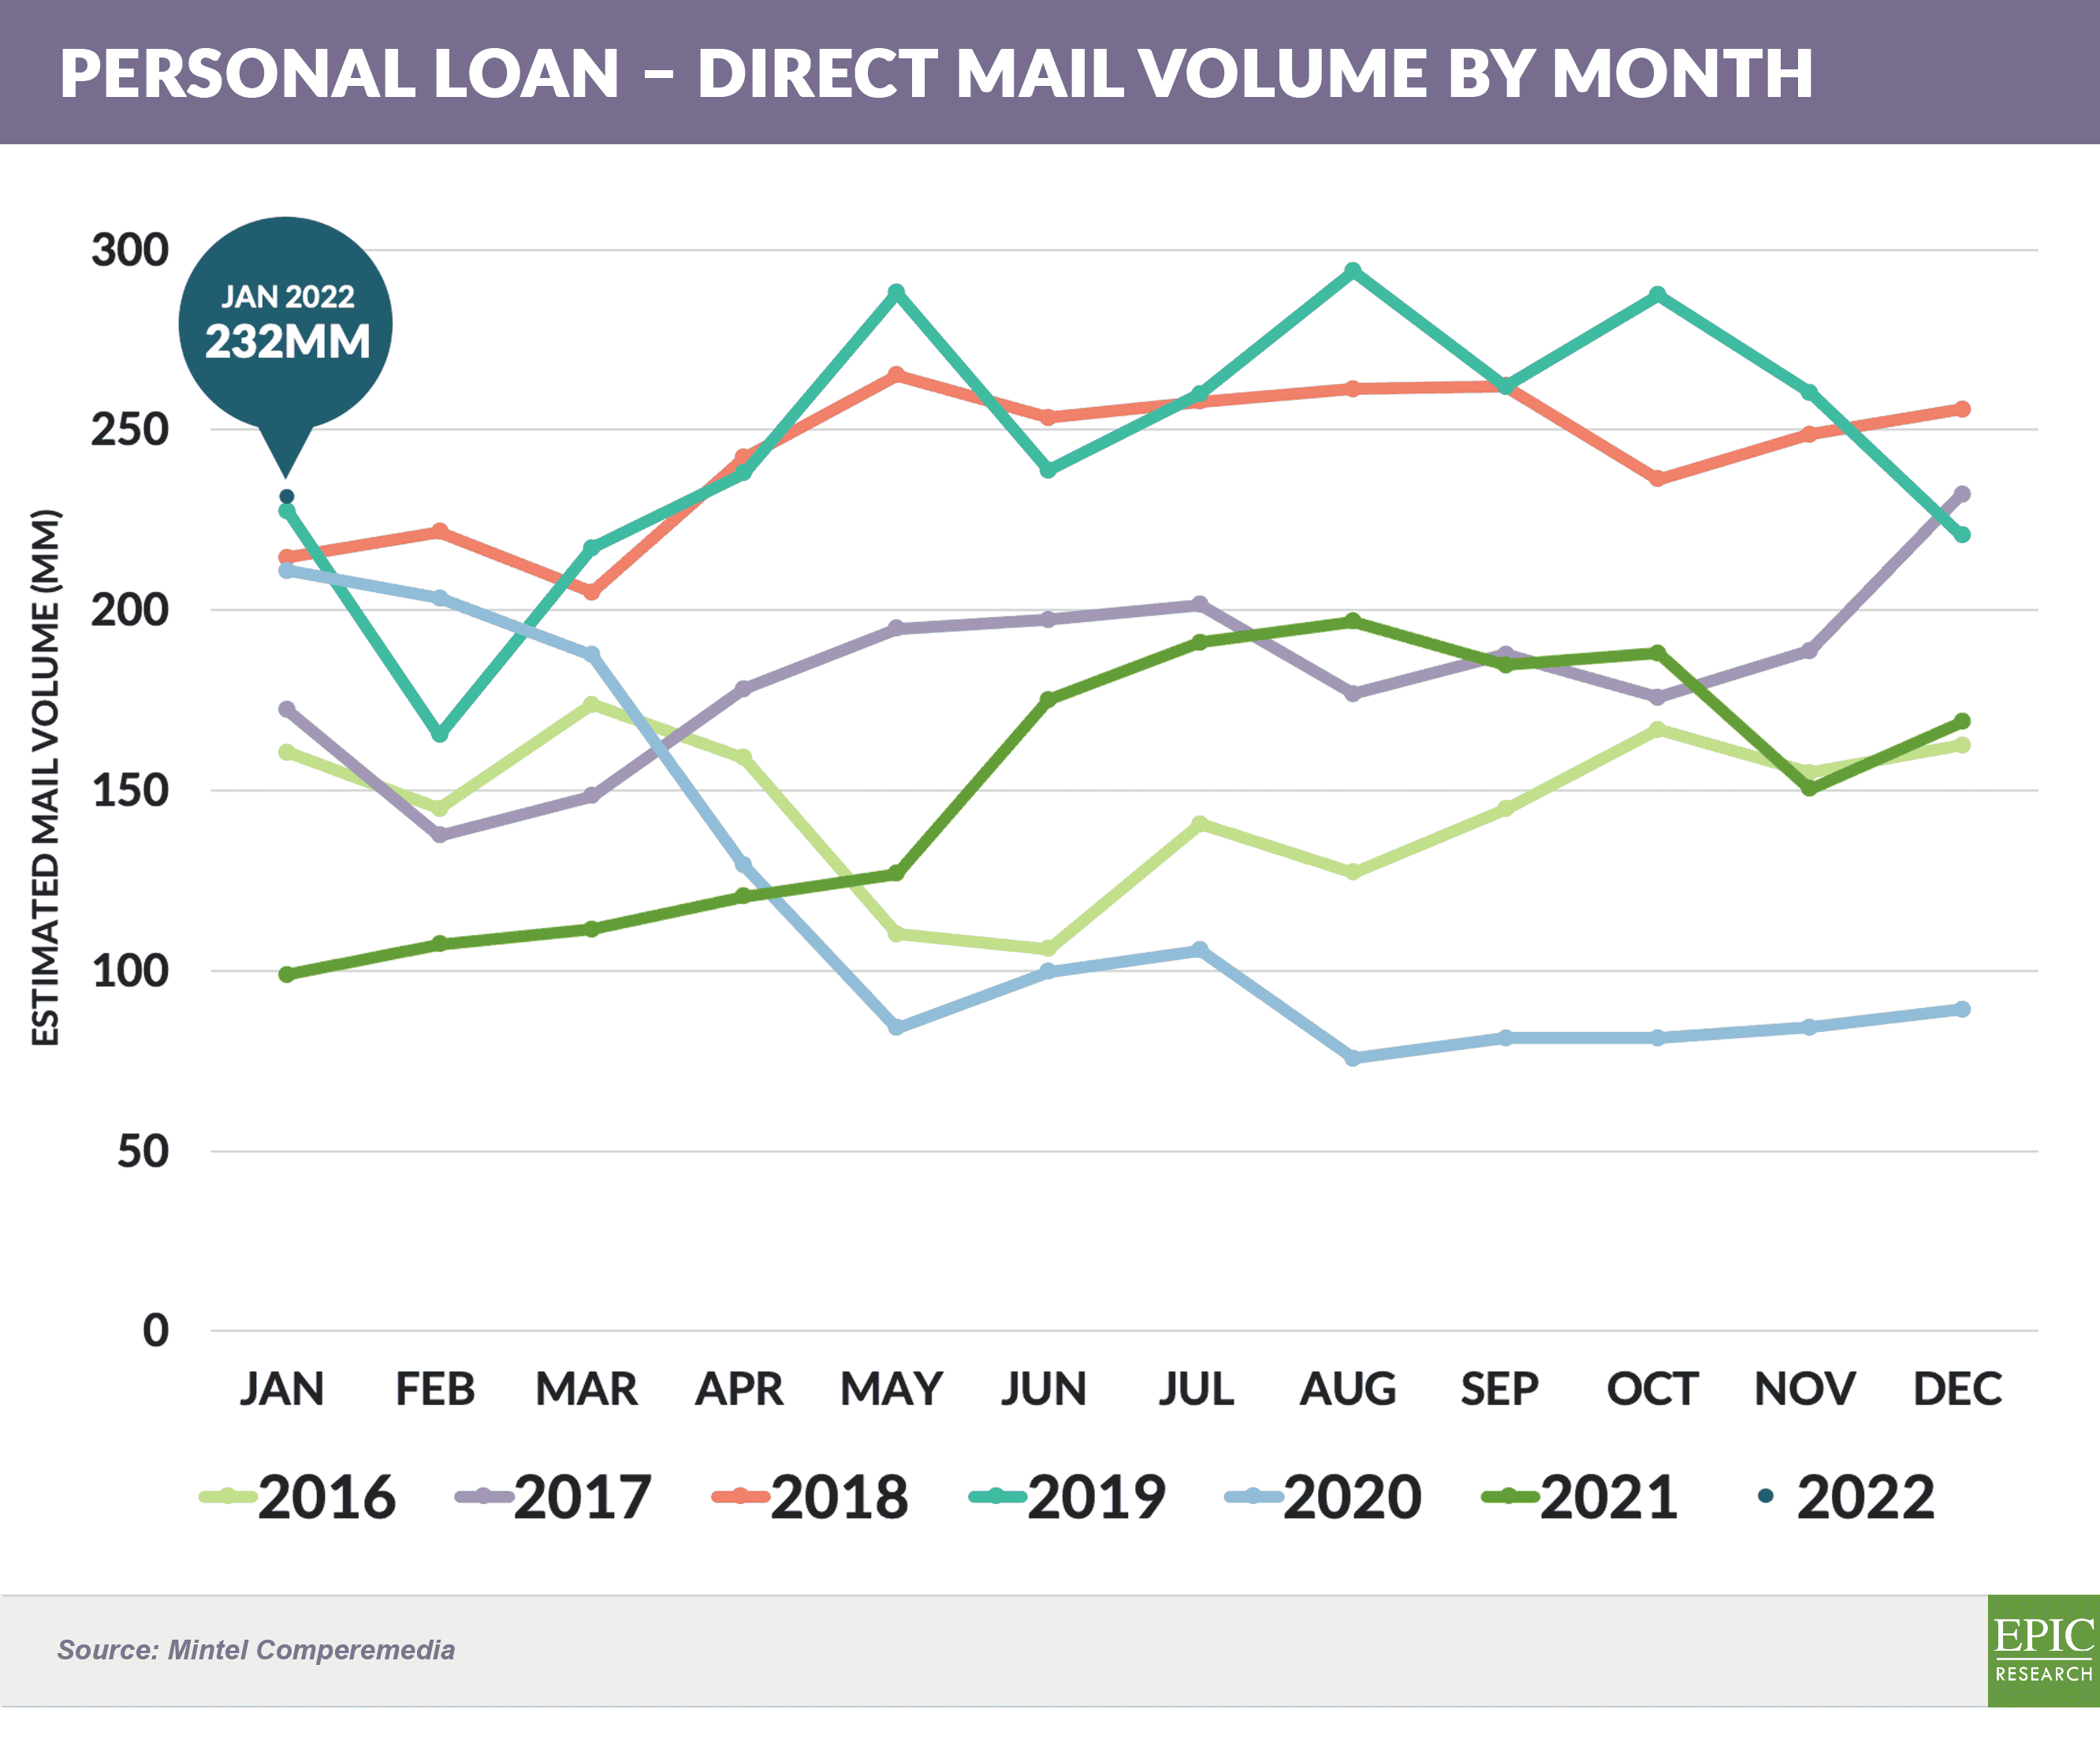 PERSONAL LOAN – DIRECT MAIL VOLUME YOY 20220305